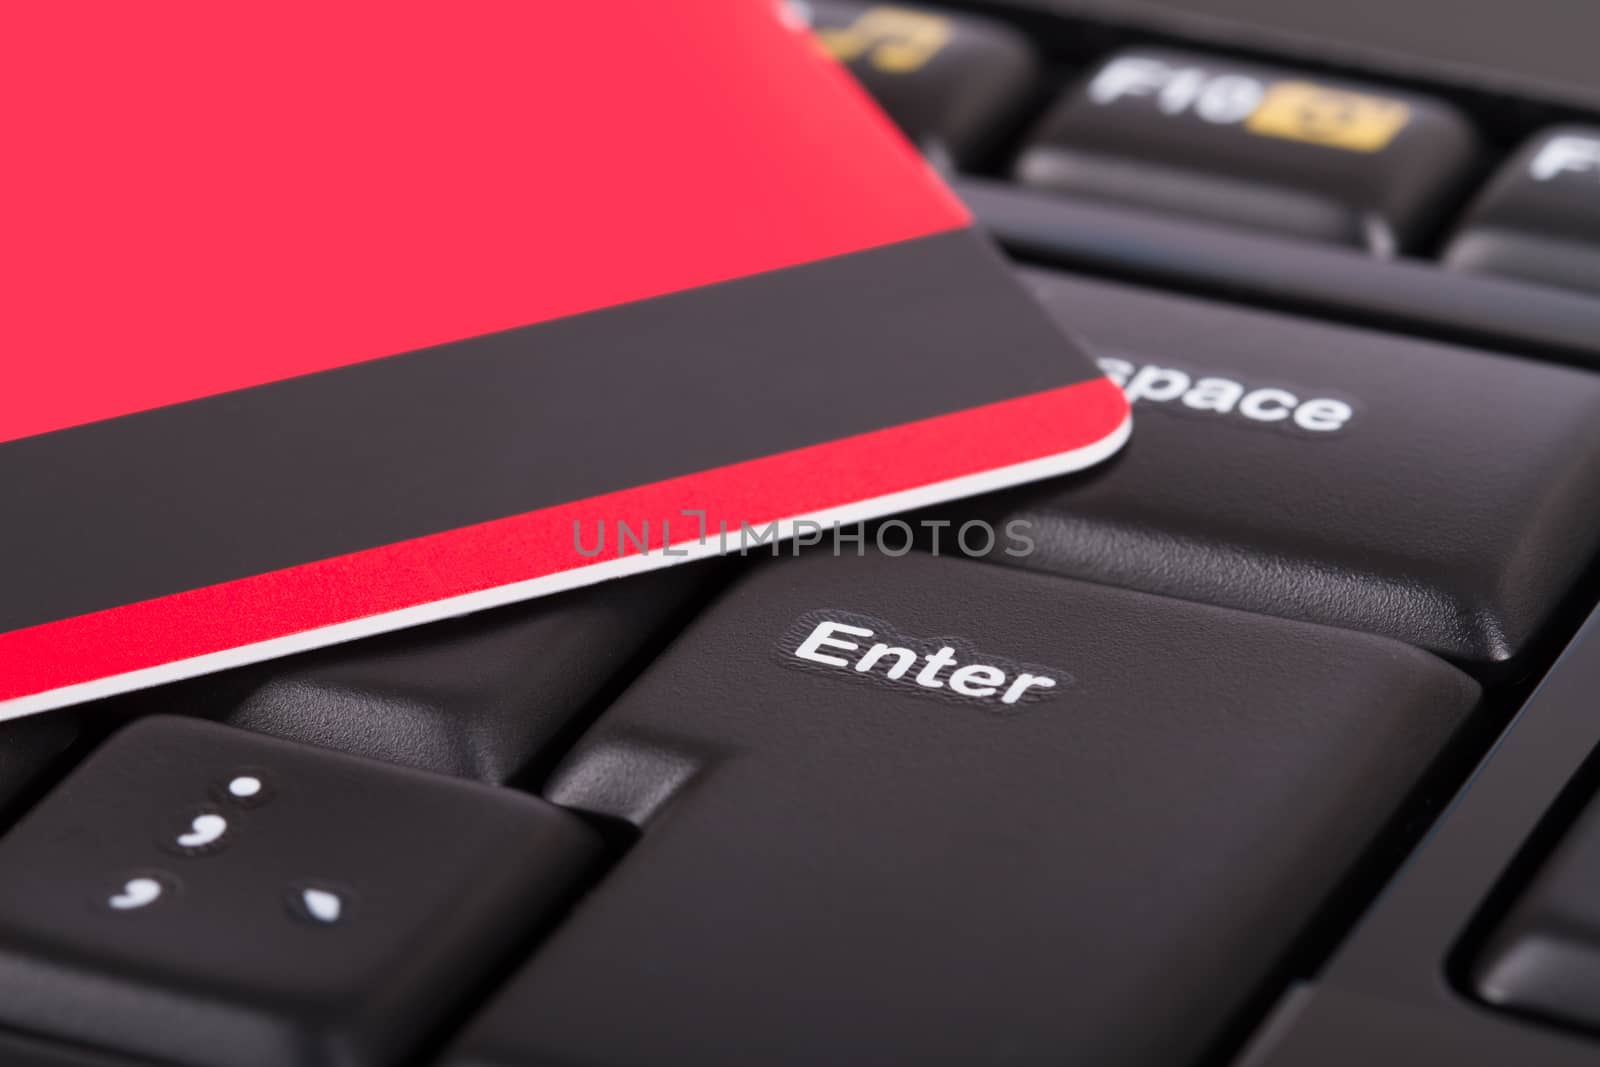 Close up view of credit card on black computer keyboard.